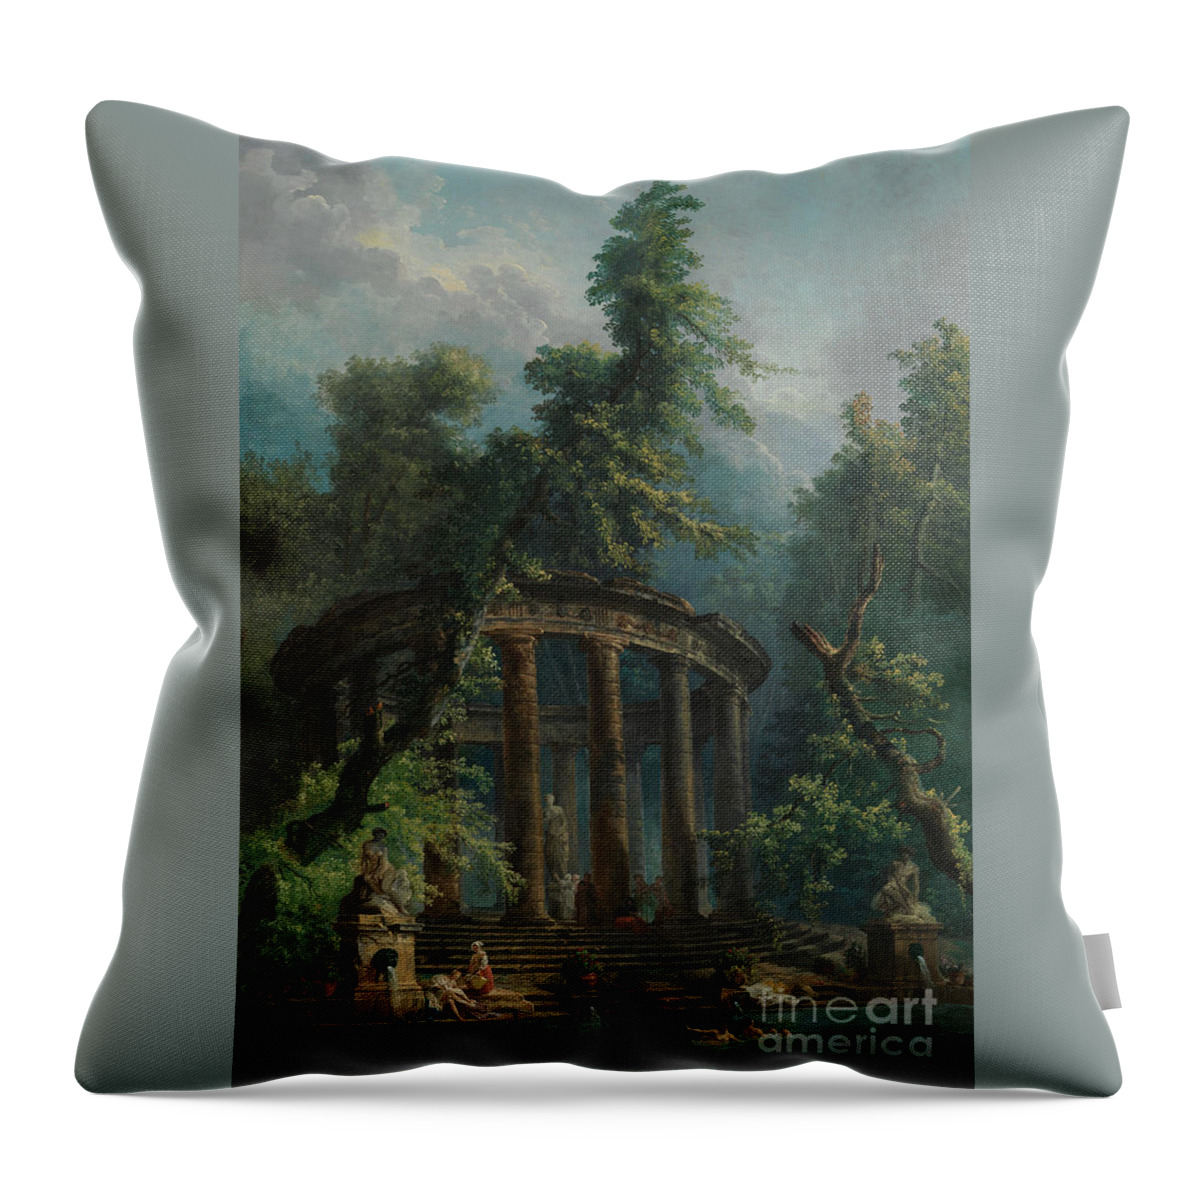 Bathers Throw Pillow featuring the painting The Bathing Pool by Hubert Robert